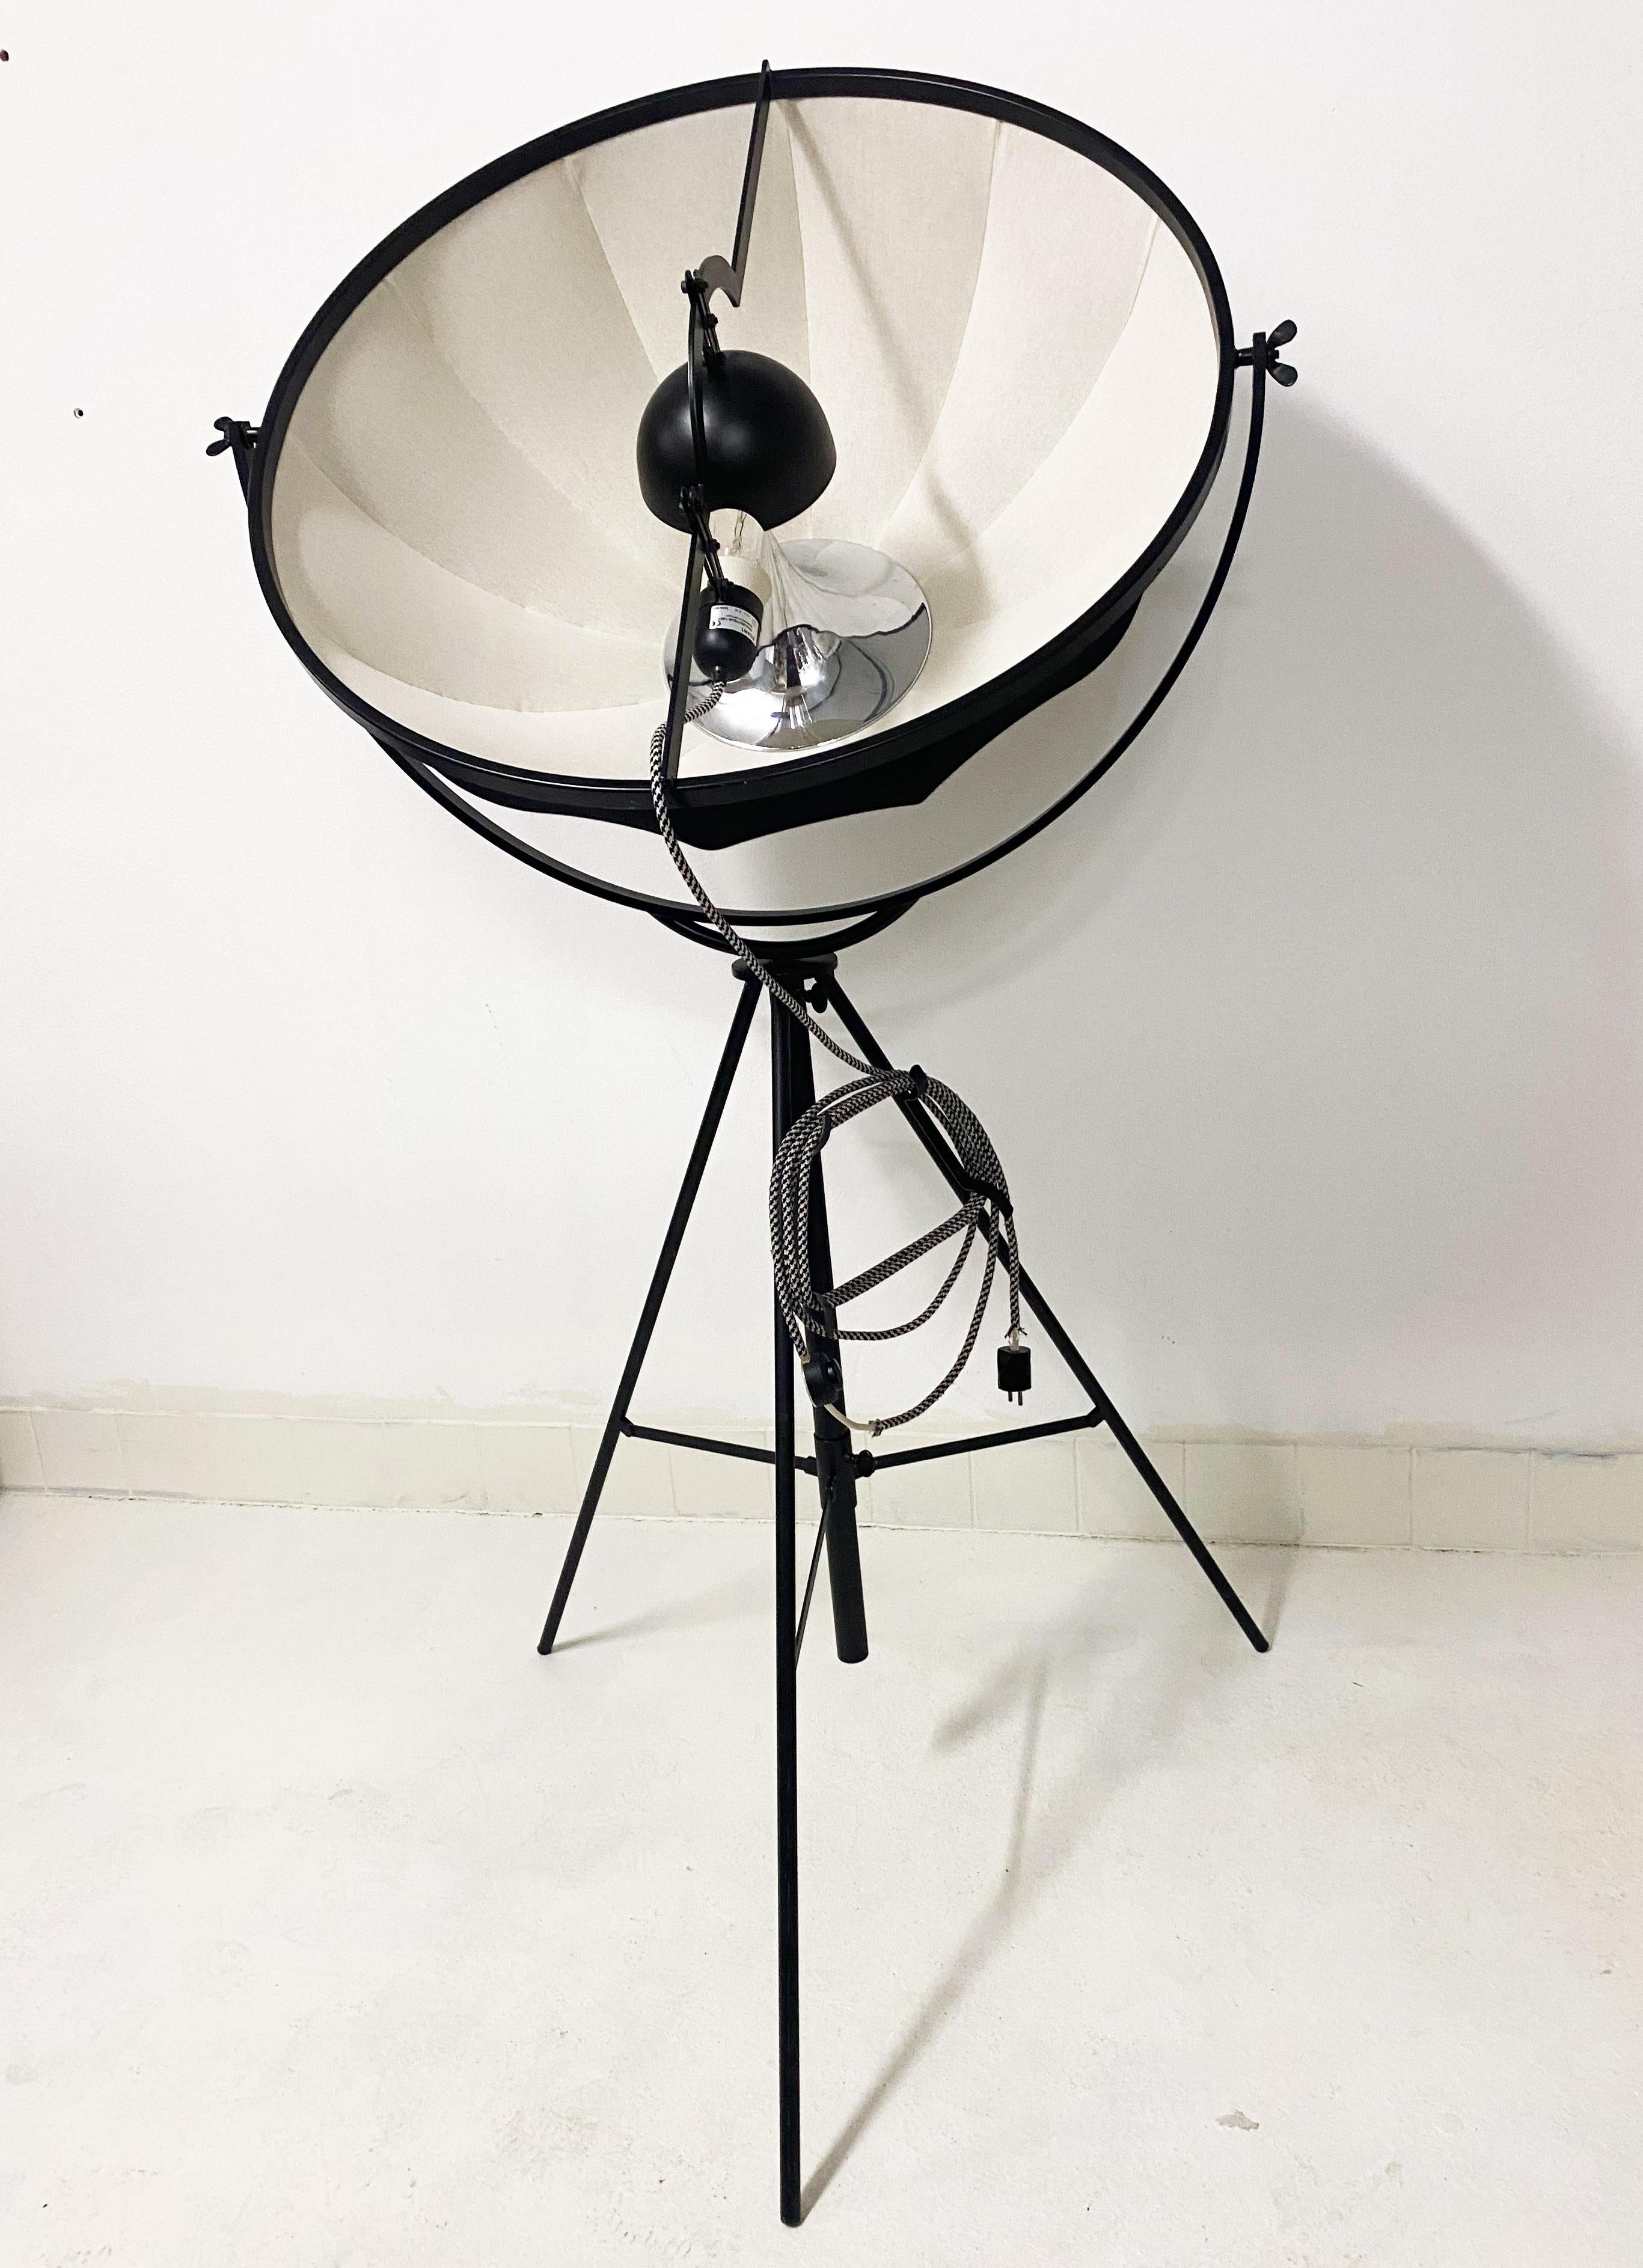 Late 20th Century Mariano Fortuny Projecteur 1907 Floor Lamp for Ecart Paris For Sale